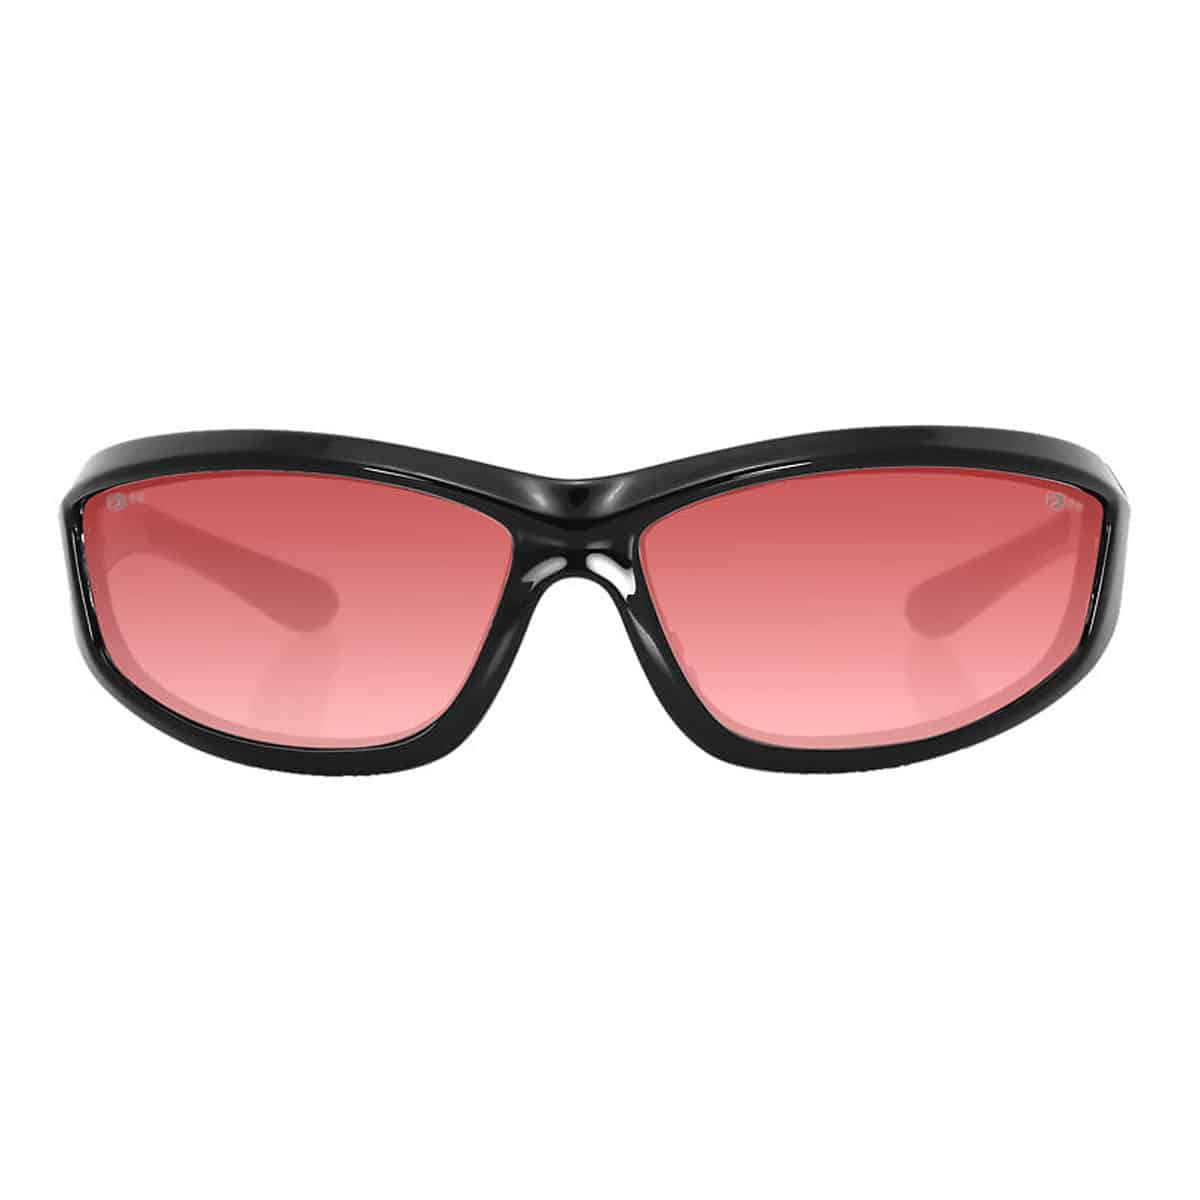 Get ready to rock the Bobster Charger Anti-fog Motorcycle Sunglasses - Rose! These sunglasses are not only cool but also keep your eyes safe. The lenses are super special because they have anti-fog and anti-scratch properties, so you can see clearly no matter the weather.